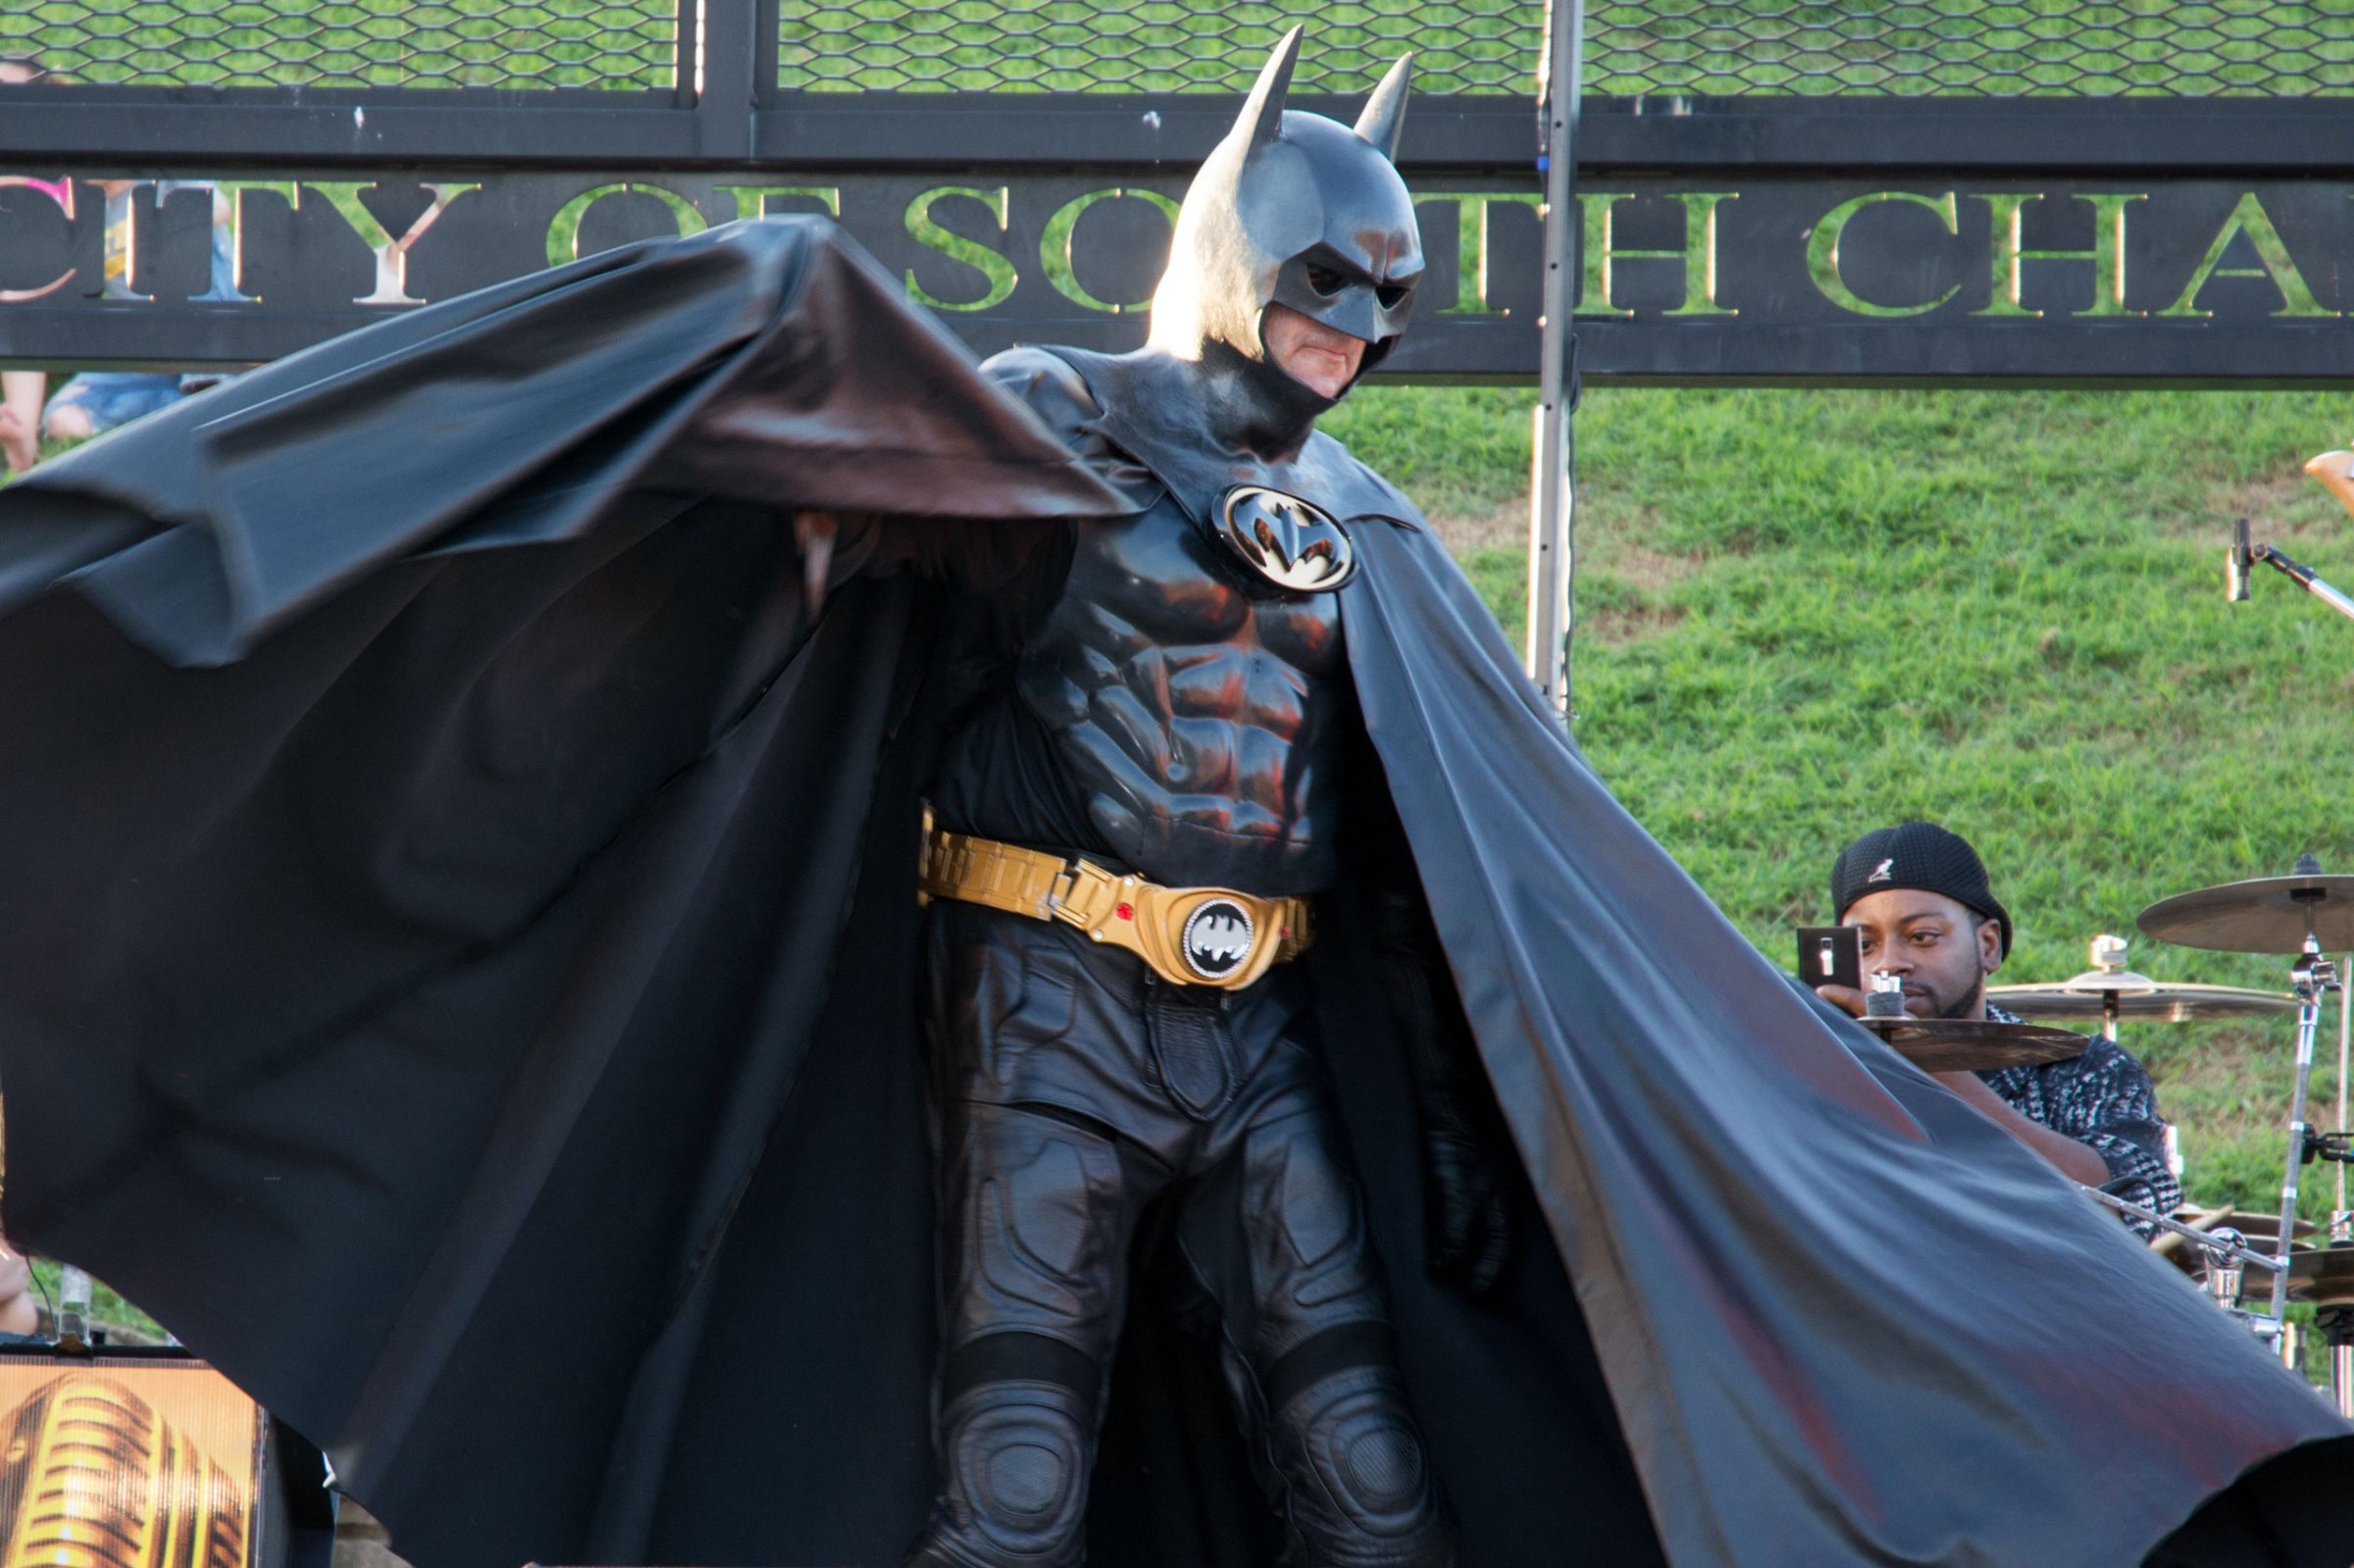 In this Aug. 15, 2015 photo provided by Linda Weekley, Leonard Robinson performs at SummerFest in South Charleston, W.Va. The Maryland man who delighted thousands of children by impersonating Batman at hospitals and charity events died when he was hit by a car while standing in the fast lane of Interstate 70, checking the engine of his custom-made Batmobile, police said Monday, Aug. 17, 2015. (Linda Weekley via AP)